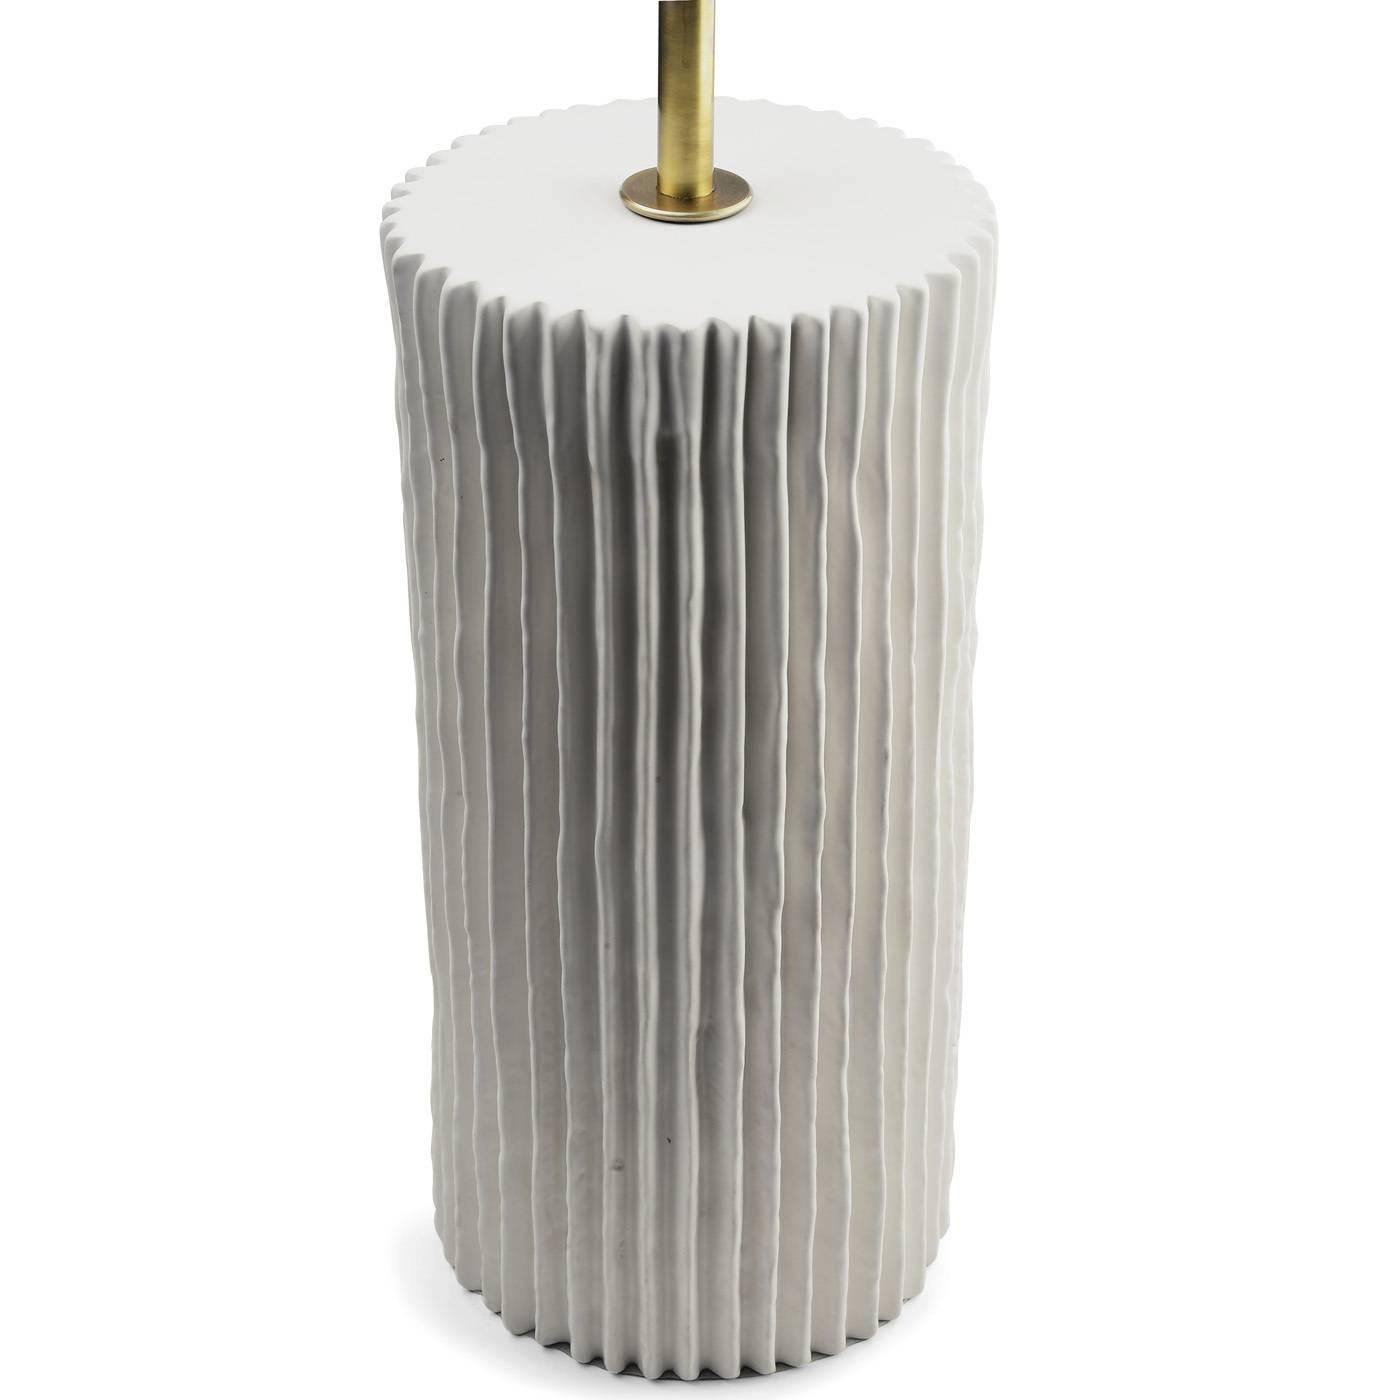 The base of this elegant lamp is a cylinder in white ceramic whose surface is decorated with ridges throughout. The body is in brass with a cylindrical diffusor that features a decoration of vertical ridges as well.